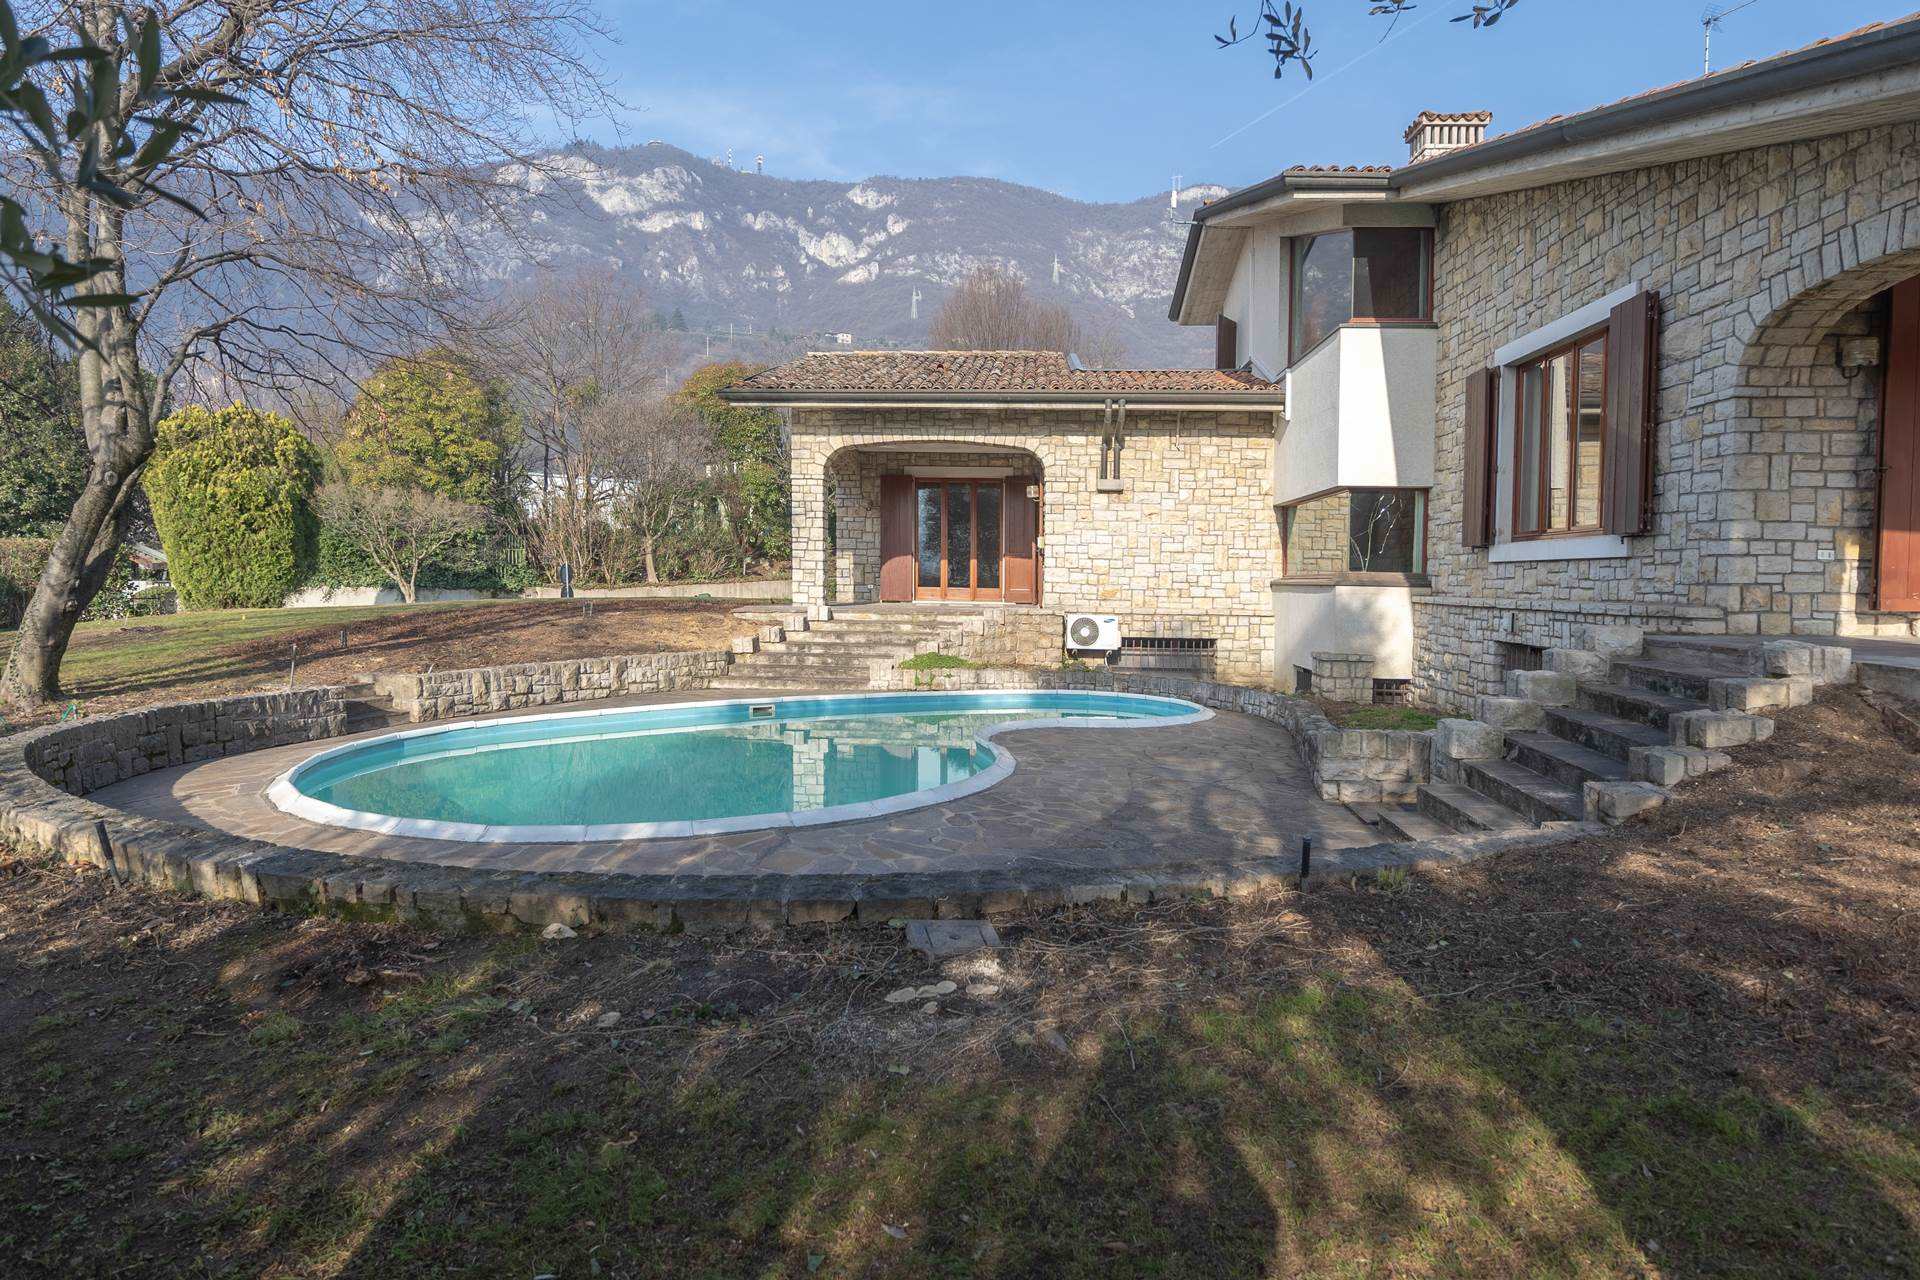 In the town centre, in a very quiet area at the foot of the mountains with absolute privacy, we offer a prestigious single villa with a garden of 2000 square metres and a private swimming pool. The 